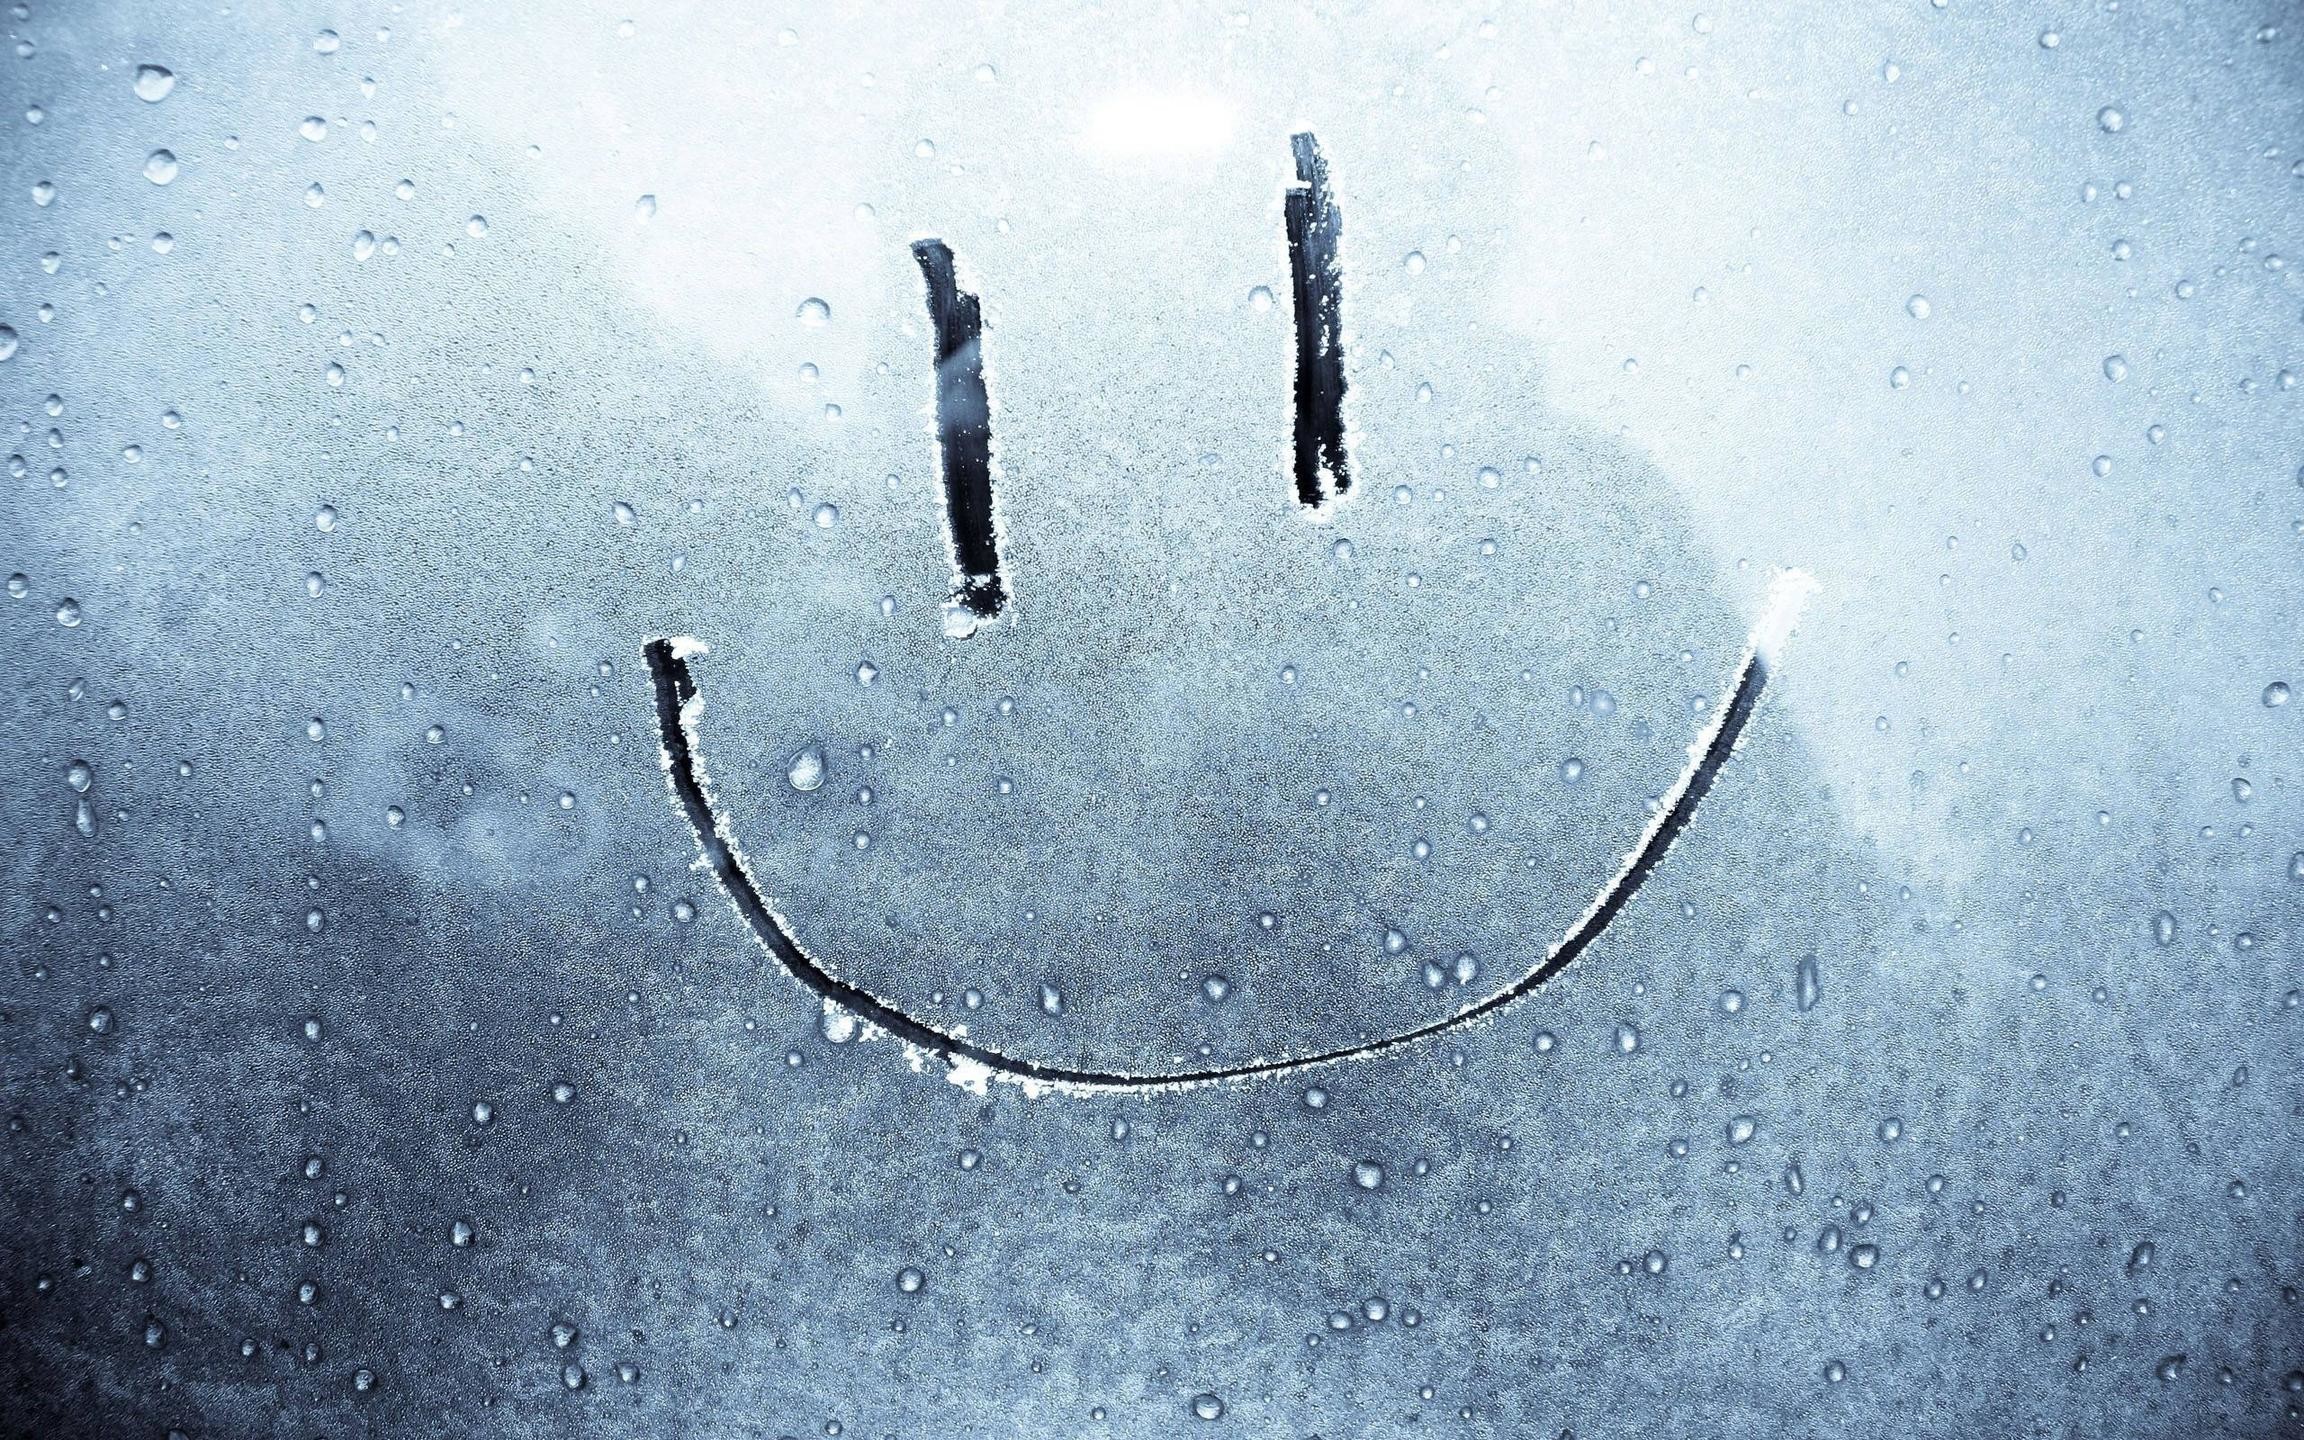 cool smilies wallpapers